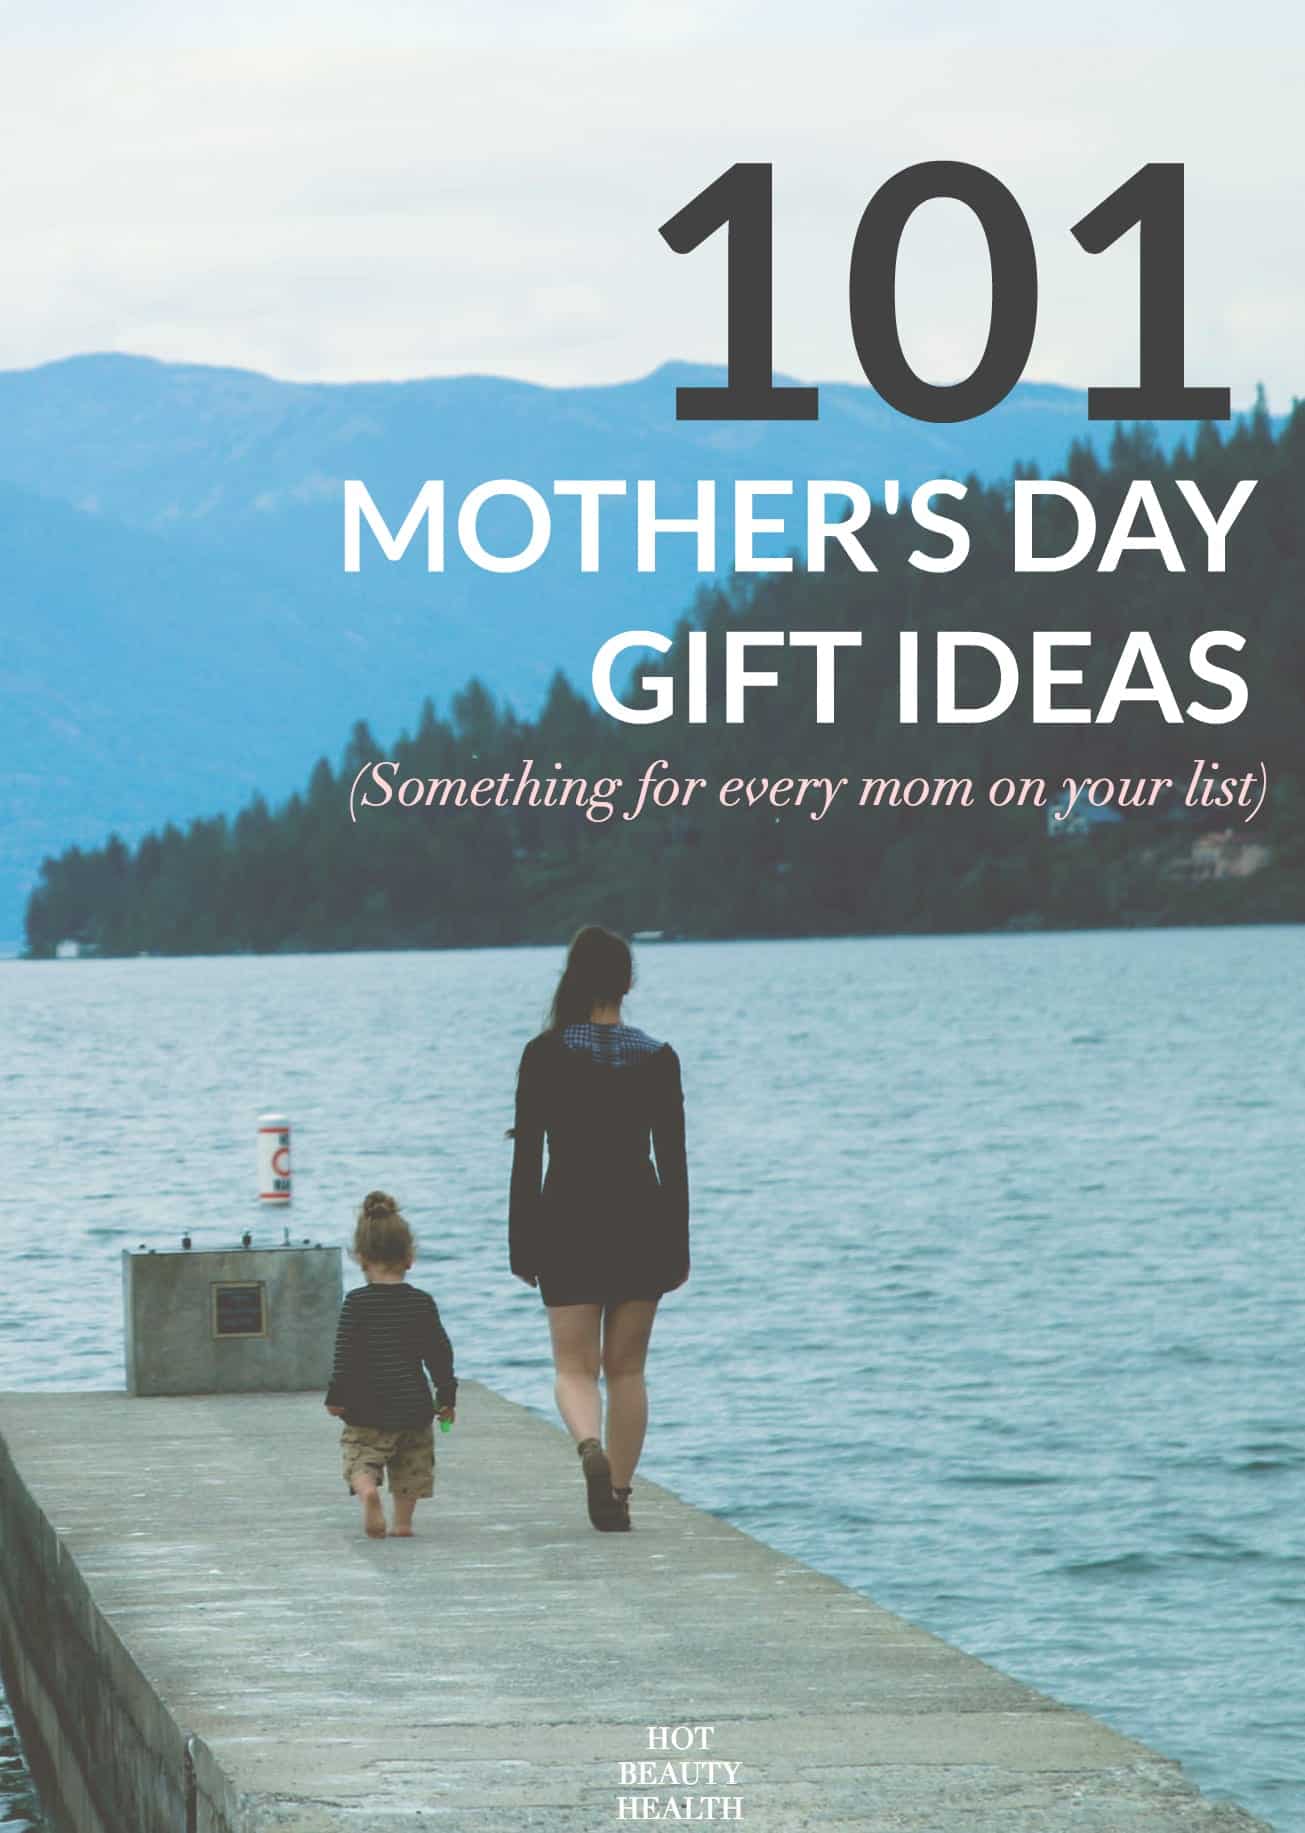 Mothers day gift ideas guide